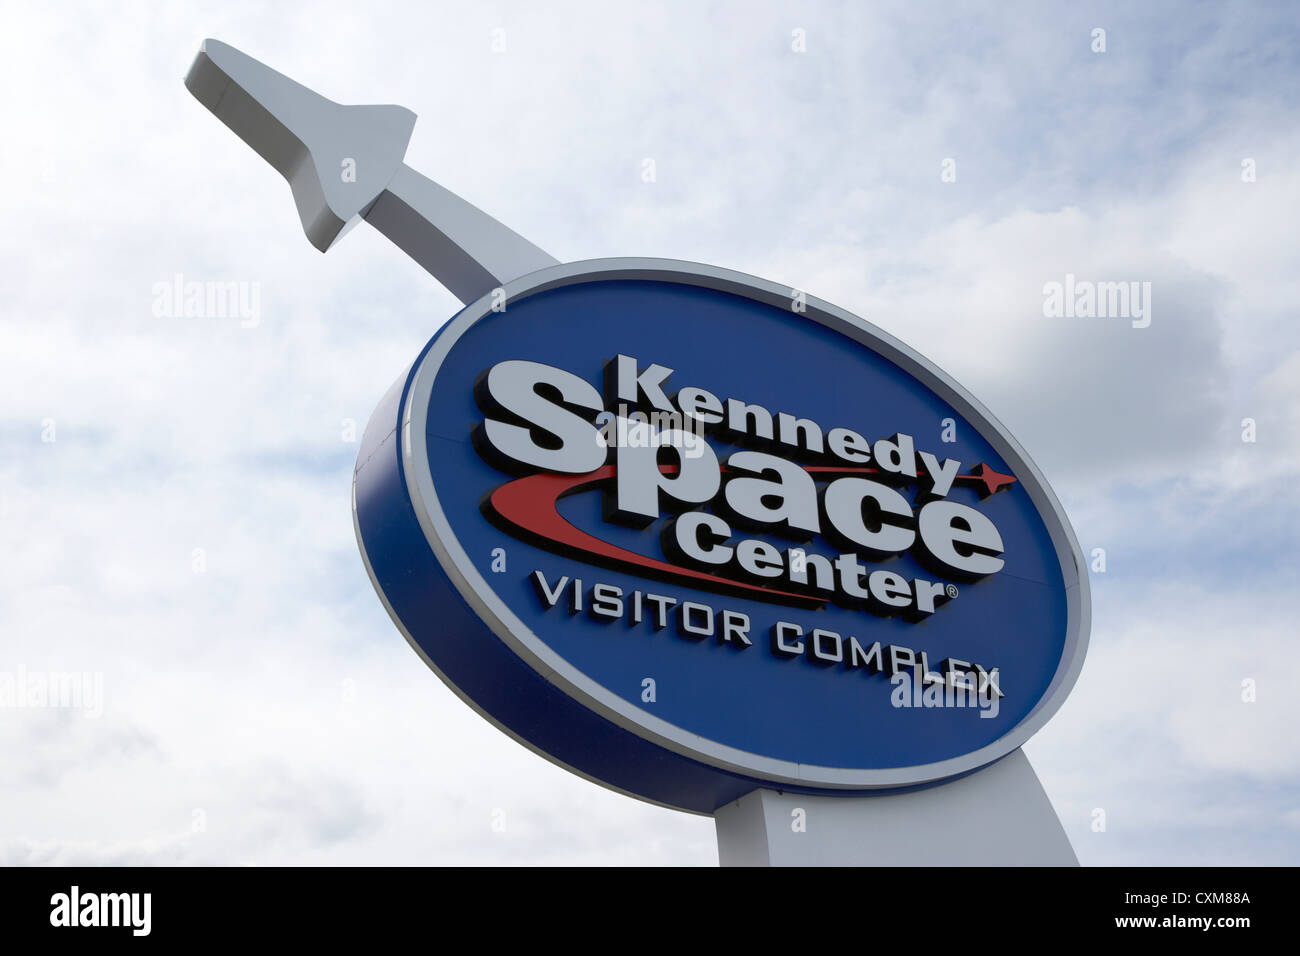 sign for the Kennedy Space Center visitor complex Florida USA Stock Photo